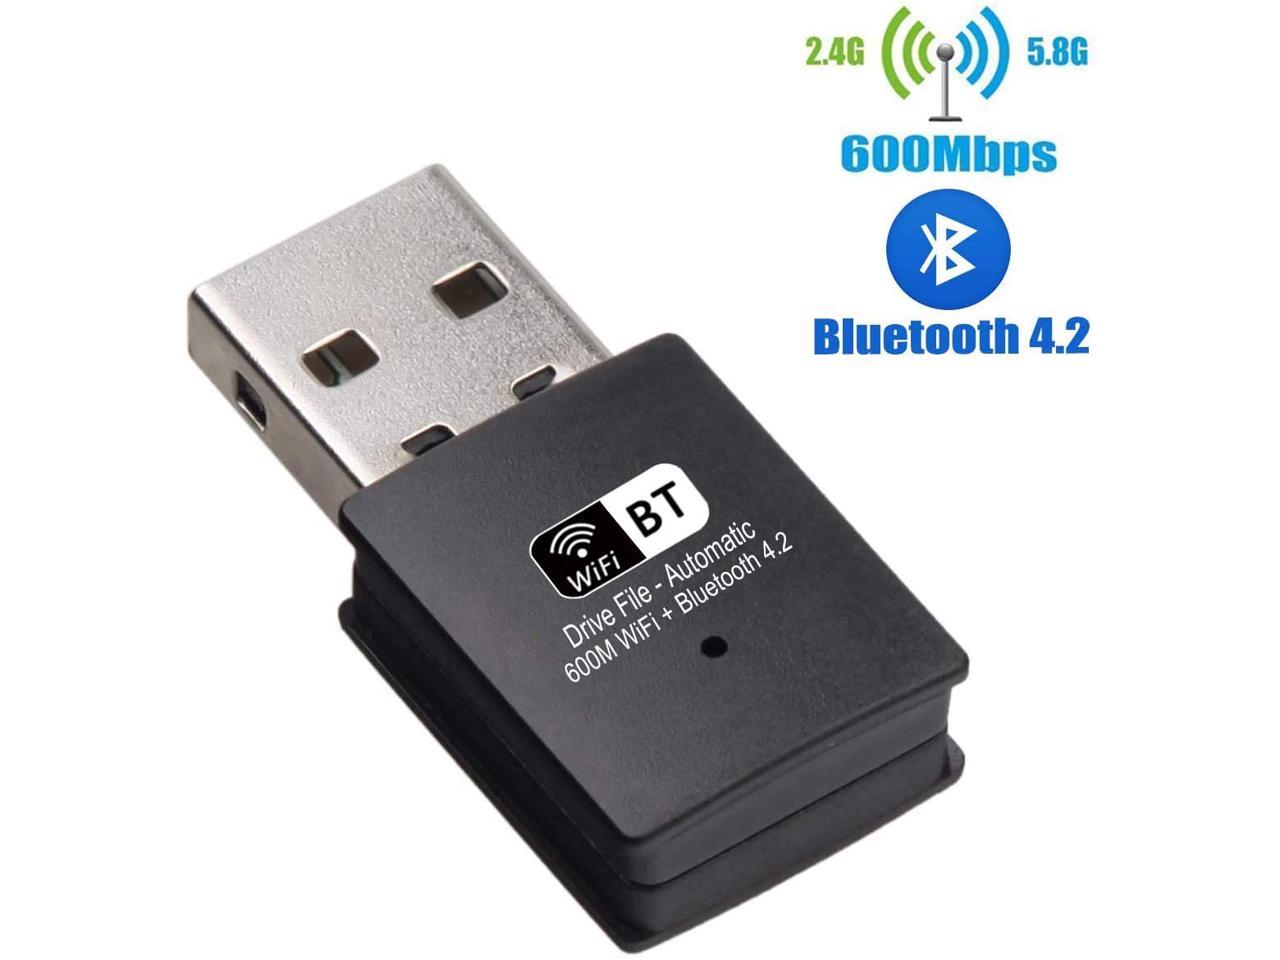 3dsp wlan and bluetooth usb adapter windows 7